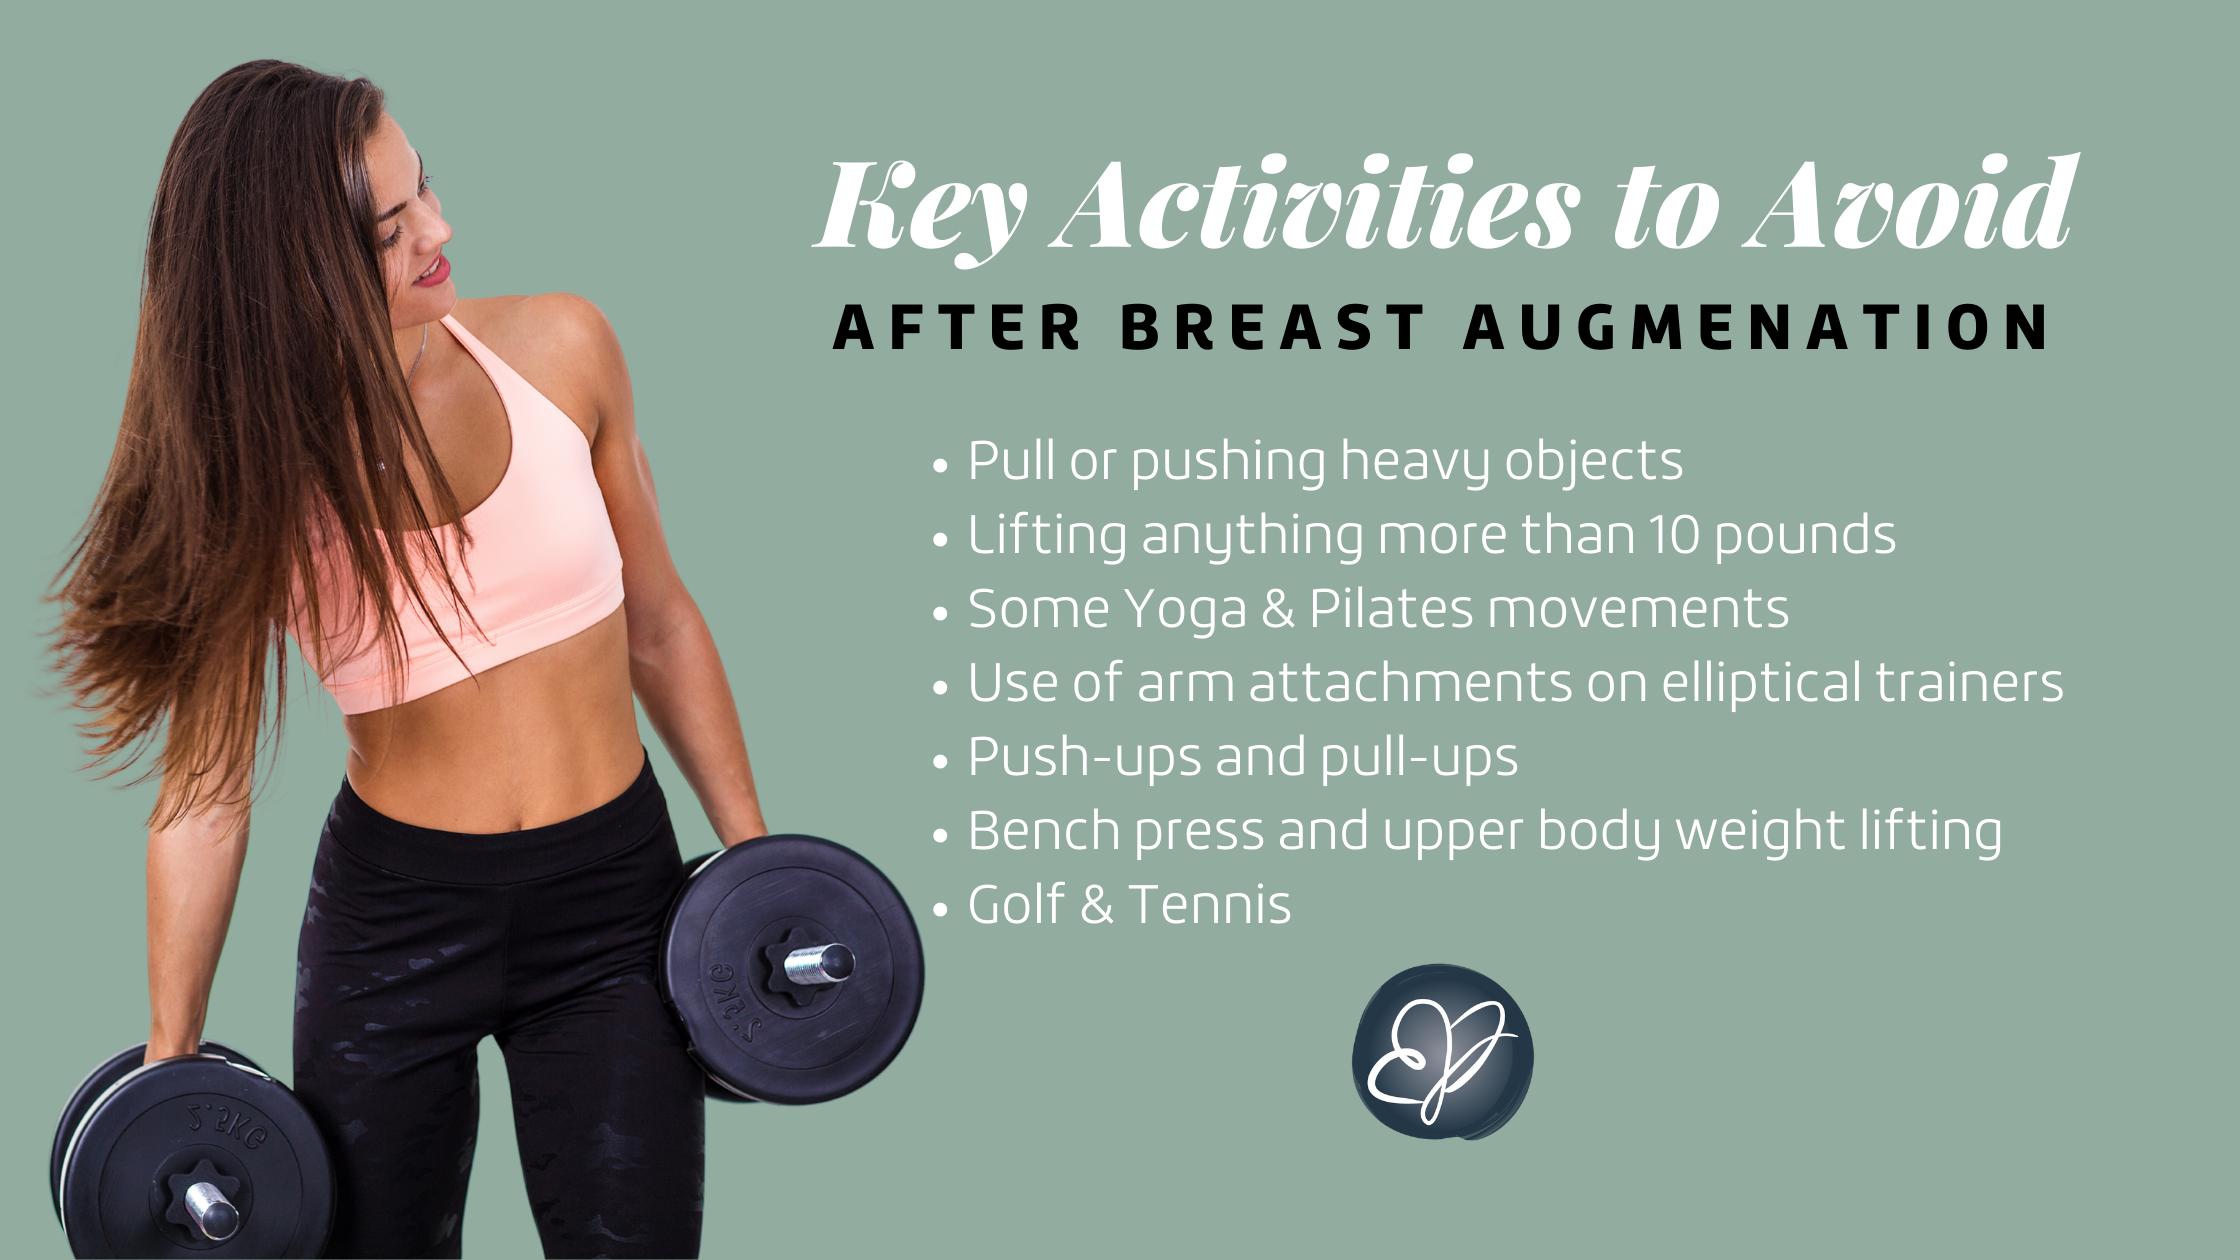 When Can I Exercise Again After Breast Augmentation Surgery?